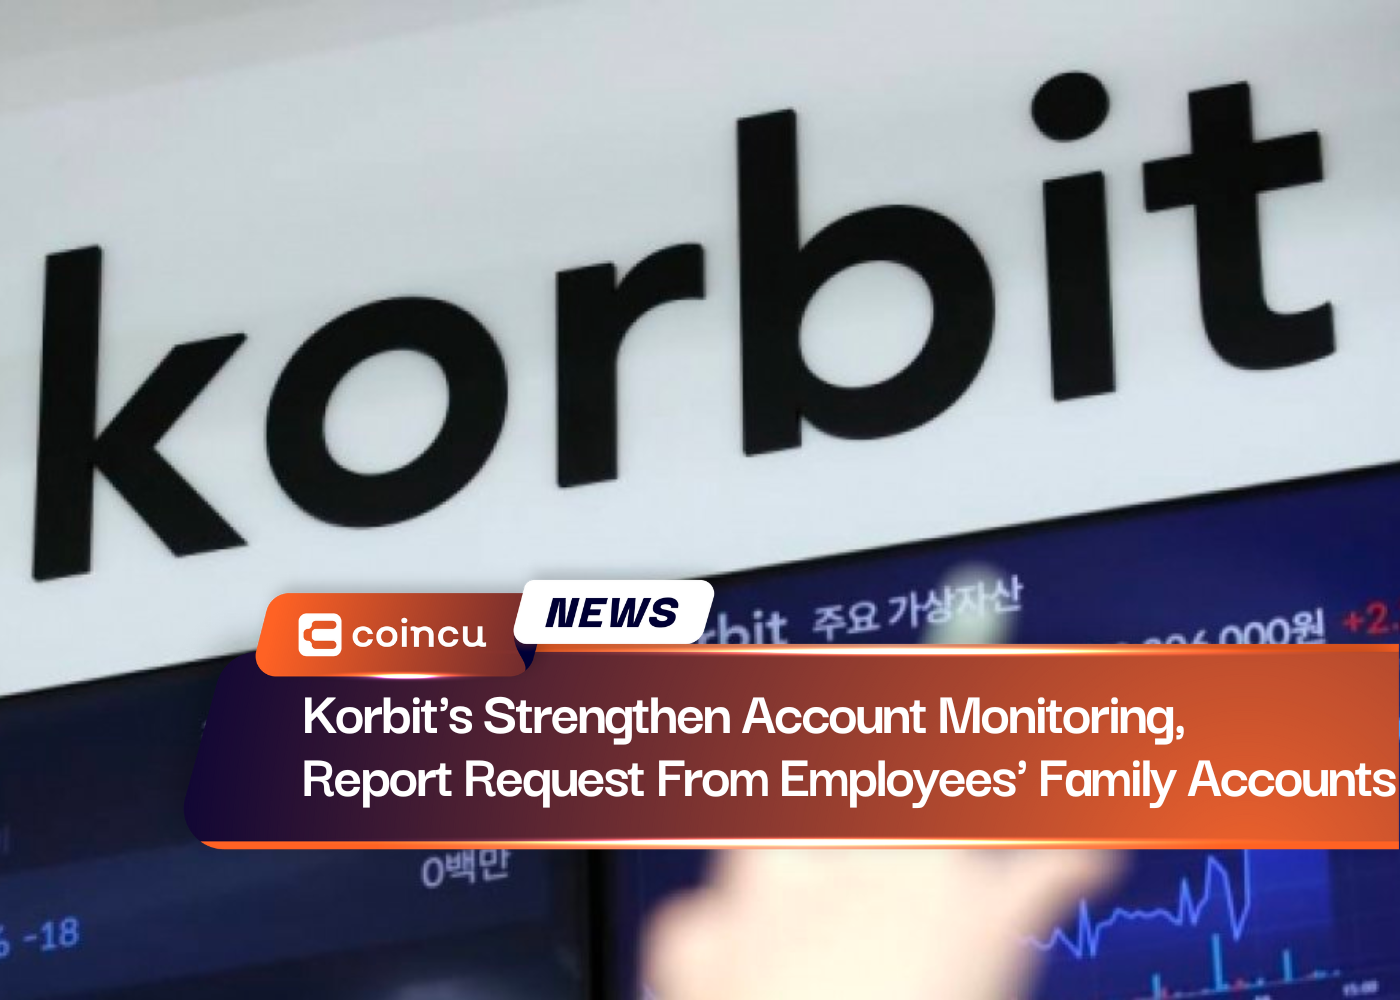 Korbit's Strengthen Account Monitoring, Report Request From Employees' Family Accounts